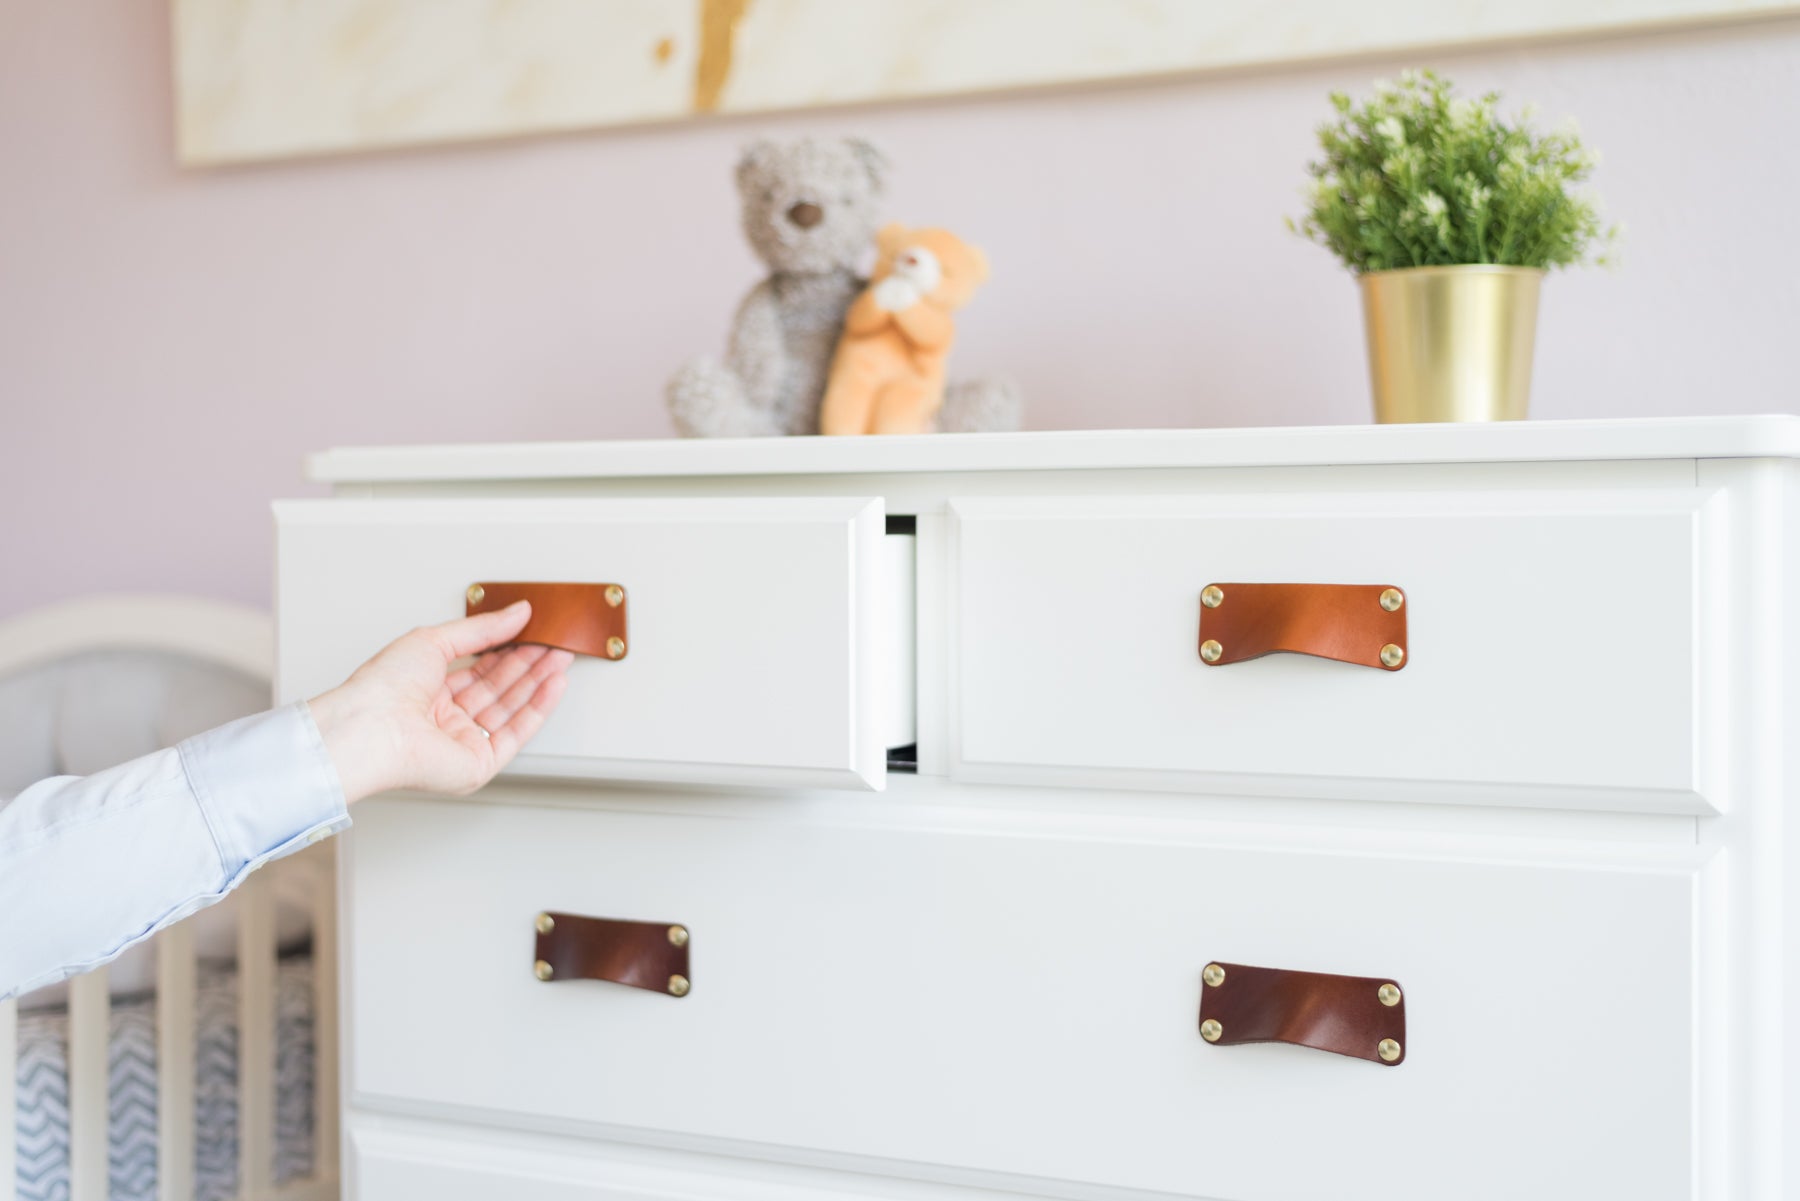 Soft, Nontoxic Leather Drawer Pulls in Kids Room Remodel